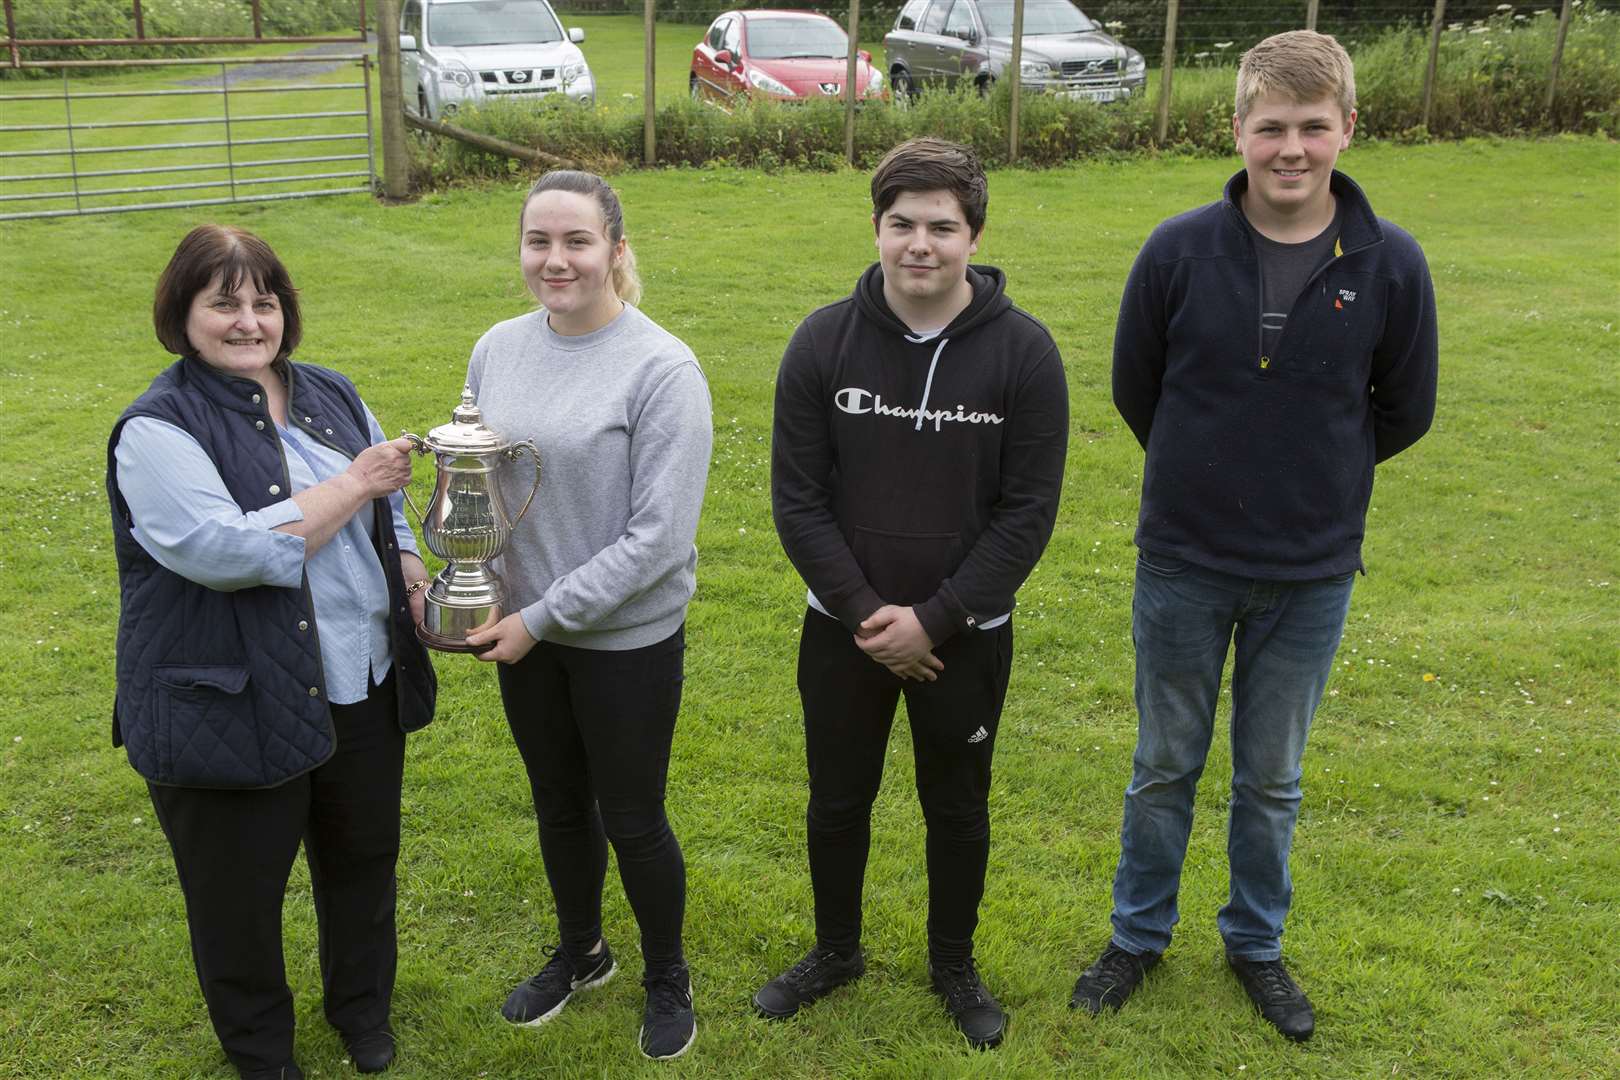 Caitlin's trophy was handed over by association secretary Marty Simpson. Looking are fellow Westfield club members Ali Baikie, who claimed second, and Murray Mackenzie (right), who was third. The competition was held at Wick Old Stagers' outdoor range. Picture: Robert MacDonald / Northern Studios